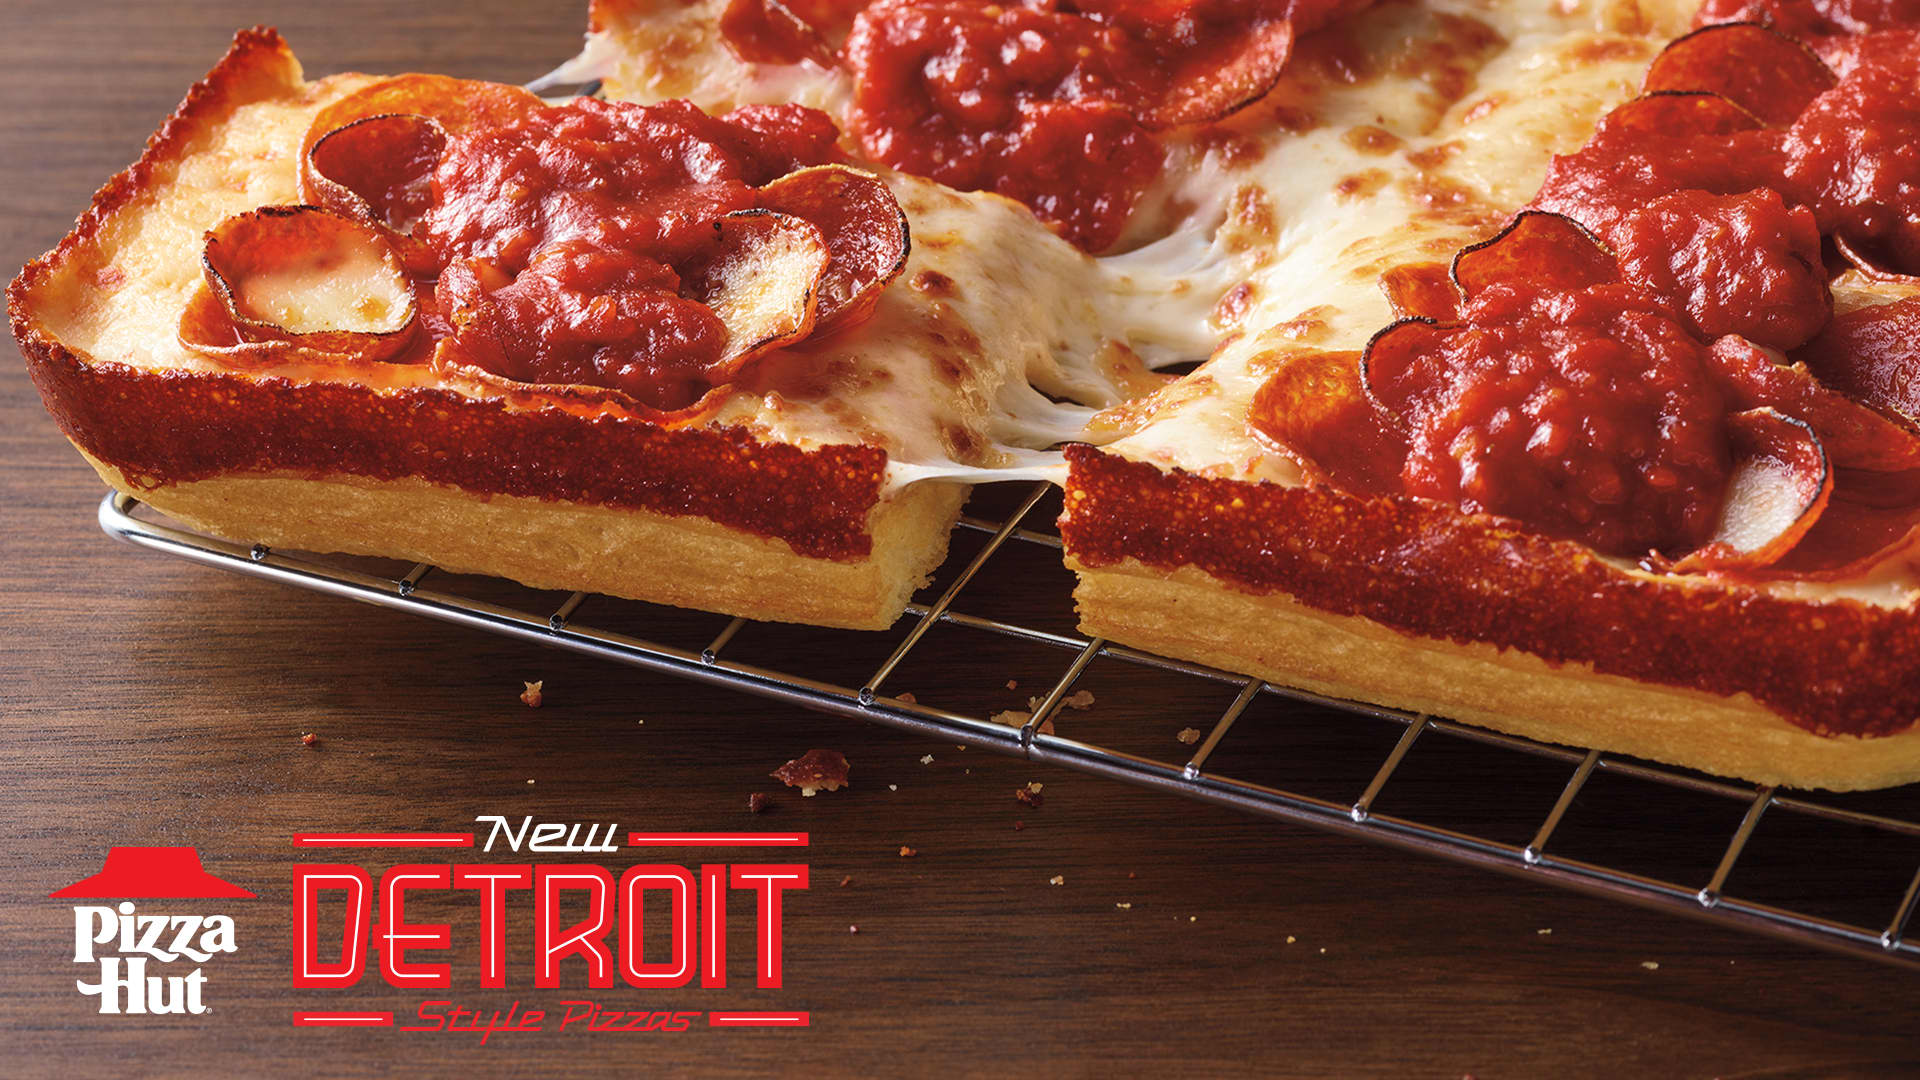 Pizza Hut to launch Detroit-style pizza as its turnaround continues